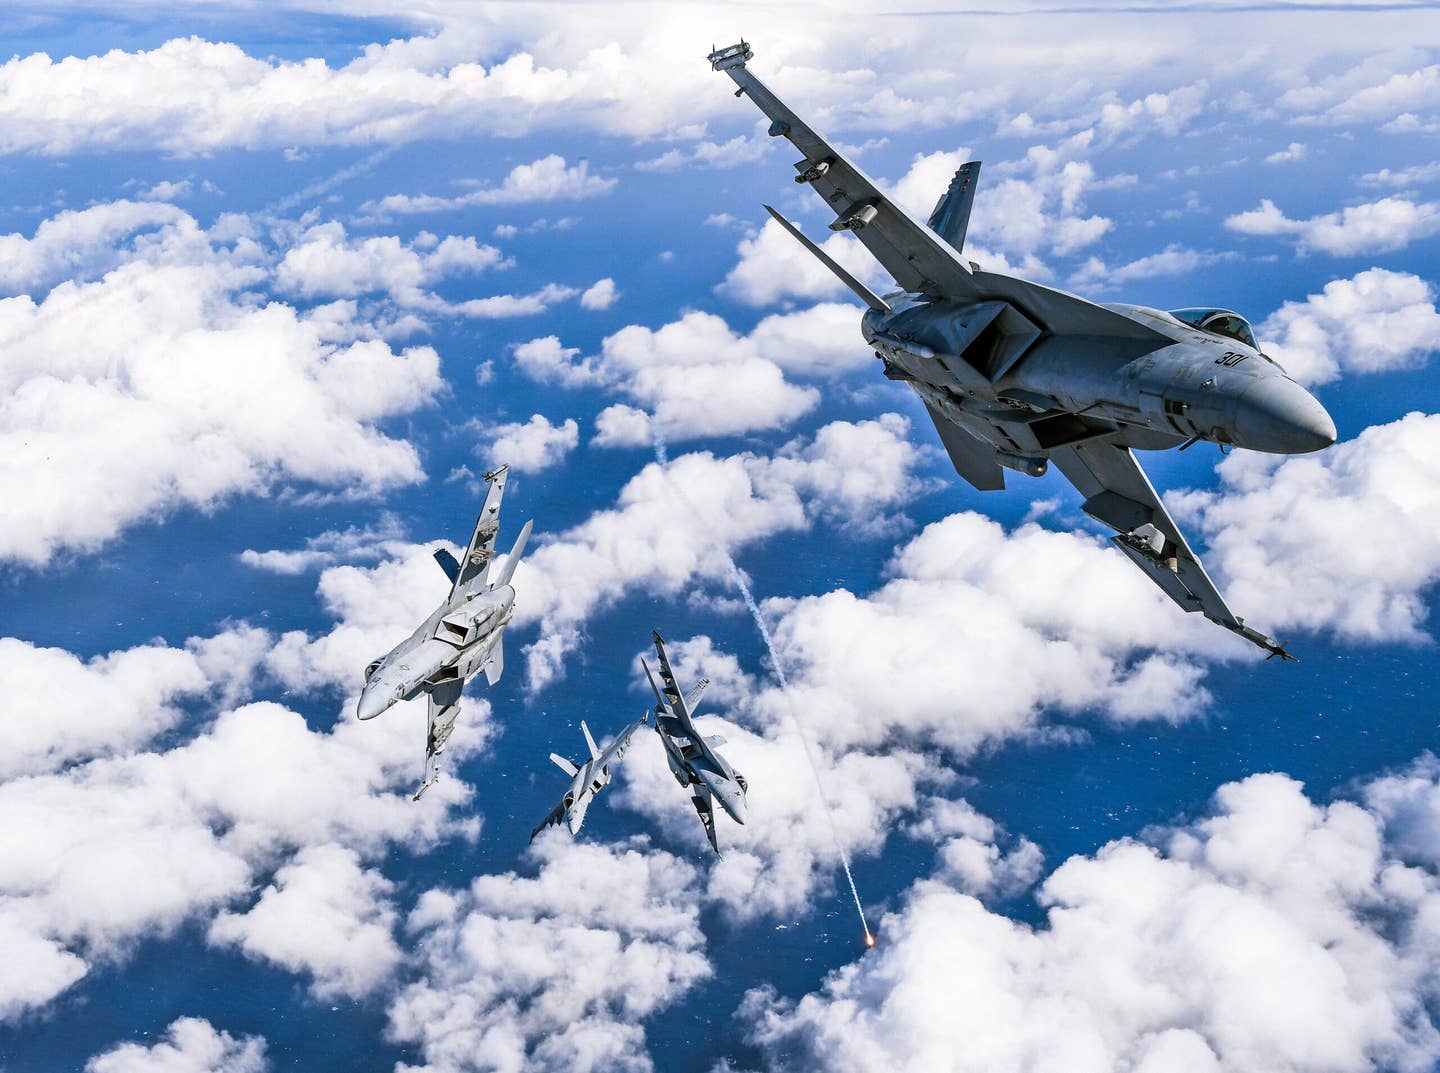 F/A-18E Super Hornets from Strike Fighter Squadron (VFA) 136 “Knighthawks” fly in formation during a photo exercise off California. (U.S. Navy photo by Chief Mass Communication Specialist Shannon Renfroe/Released)